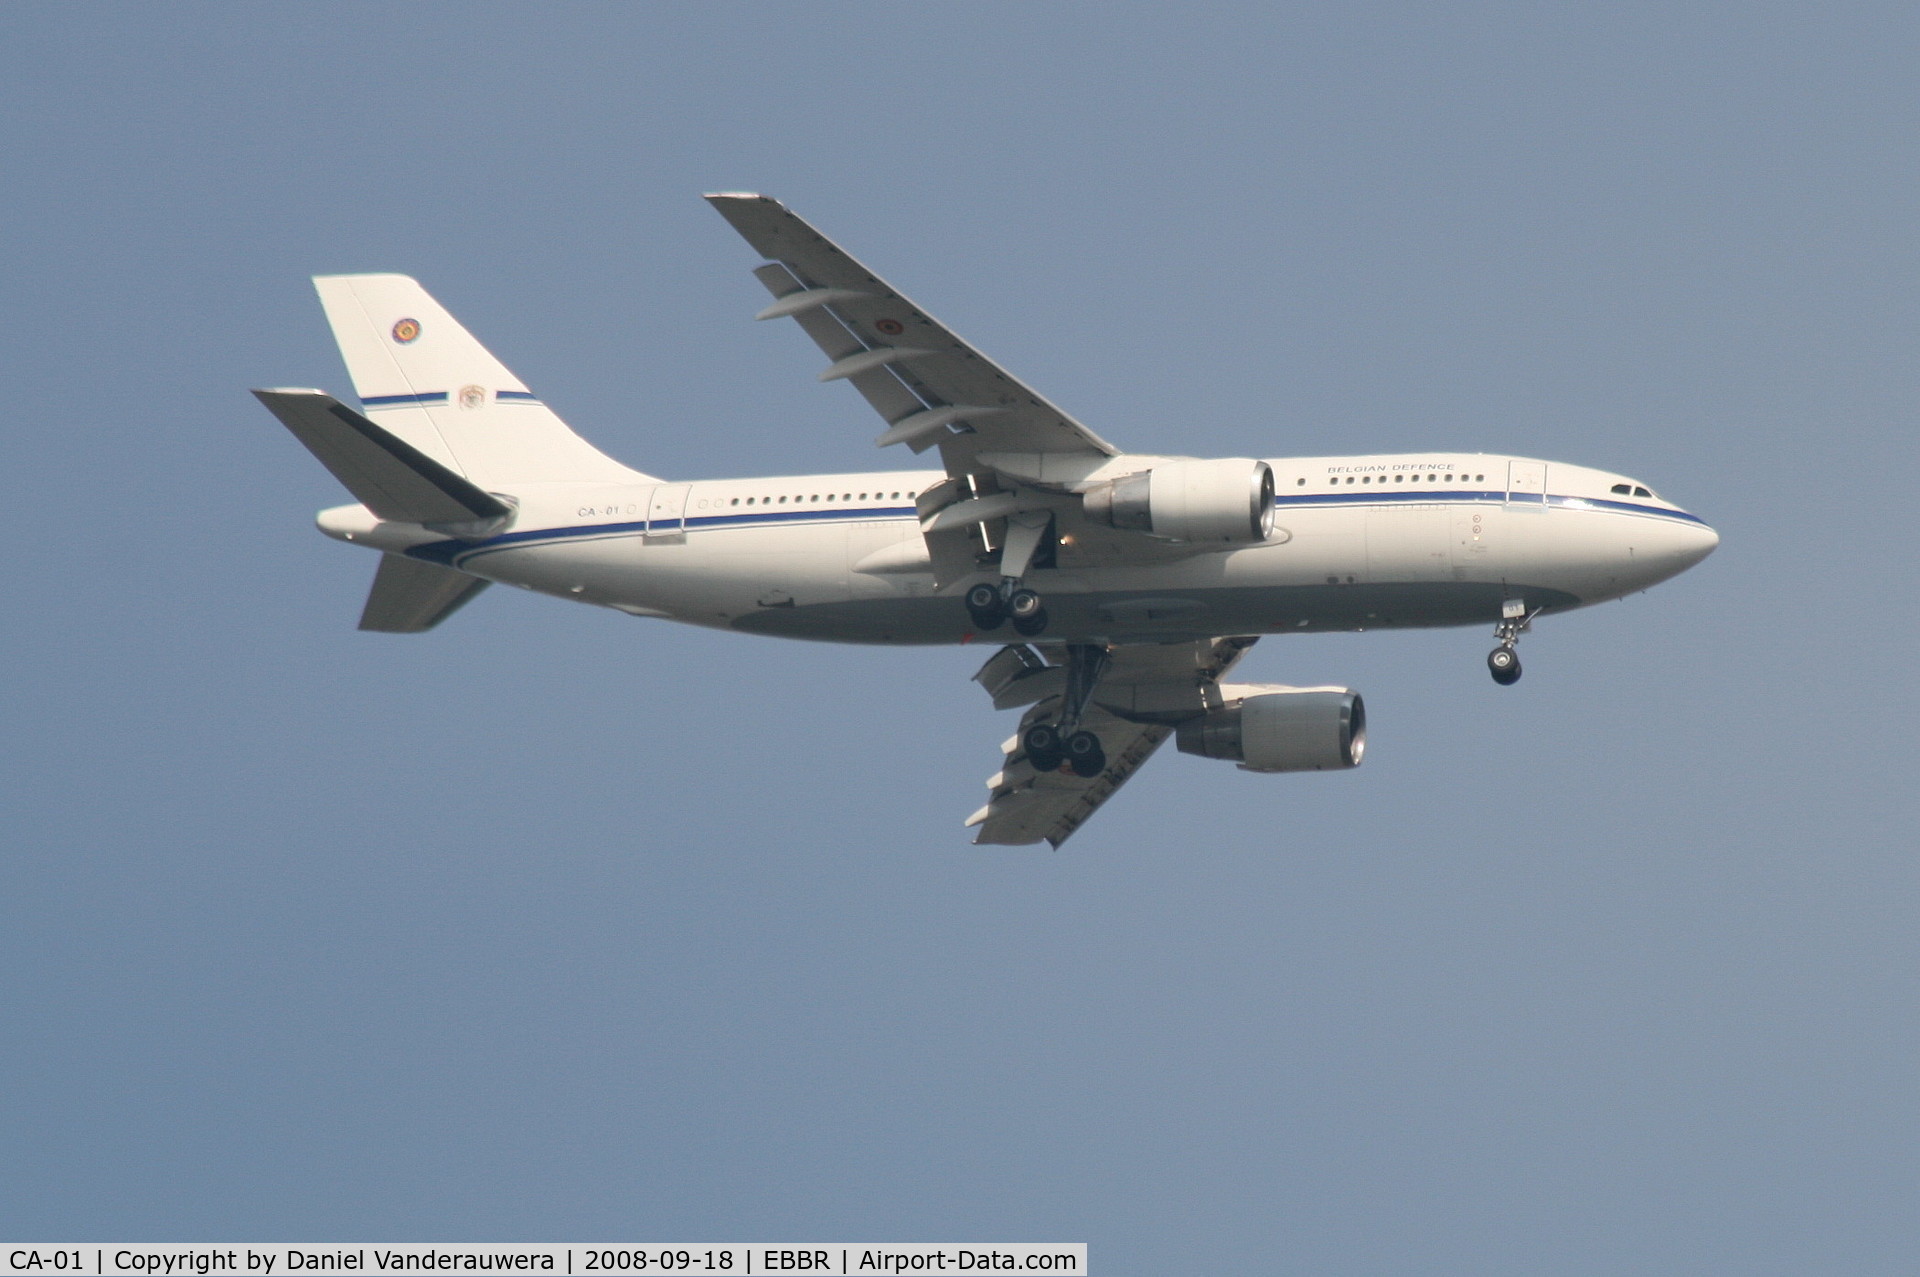 CA-01, 1985 Airbus A310-222 C/N 372, On approach to RWY 07L